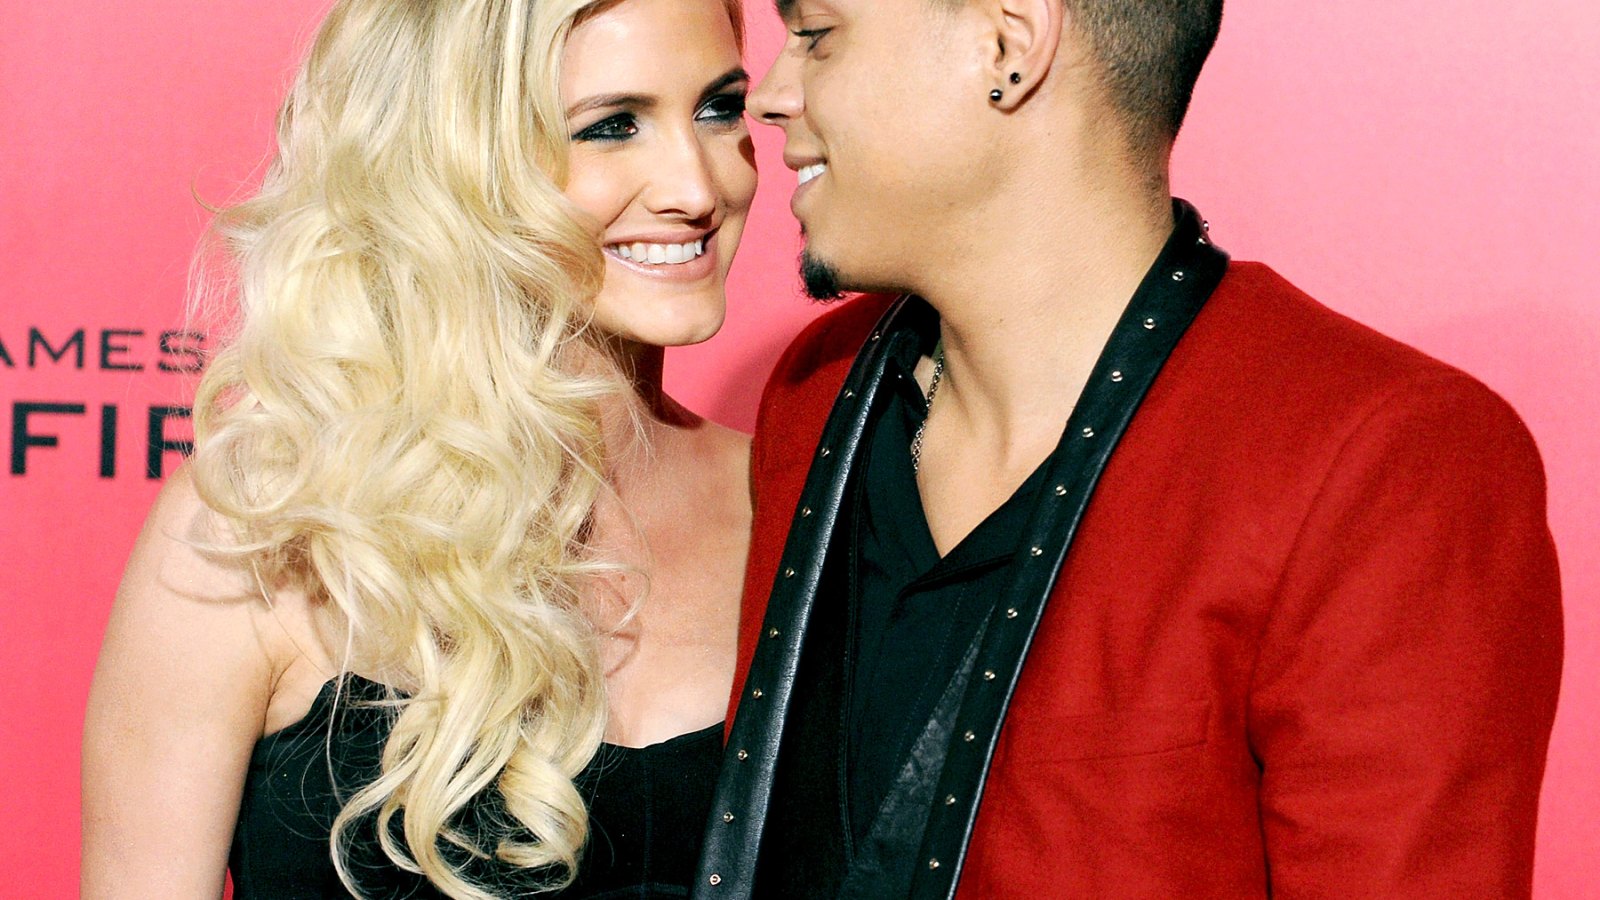 Evan Ross and Ashlee Simpson at the L.A. "Catching Fire" premiere